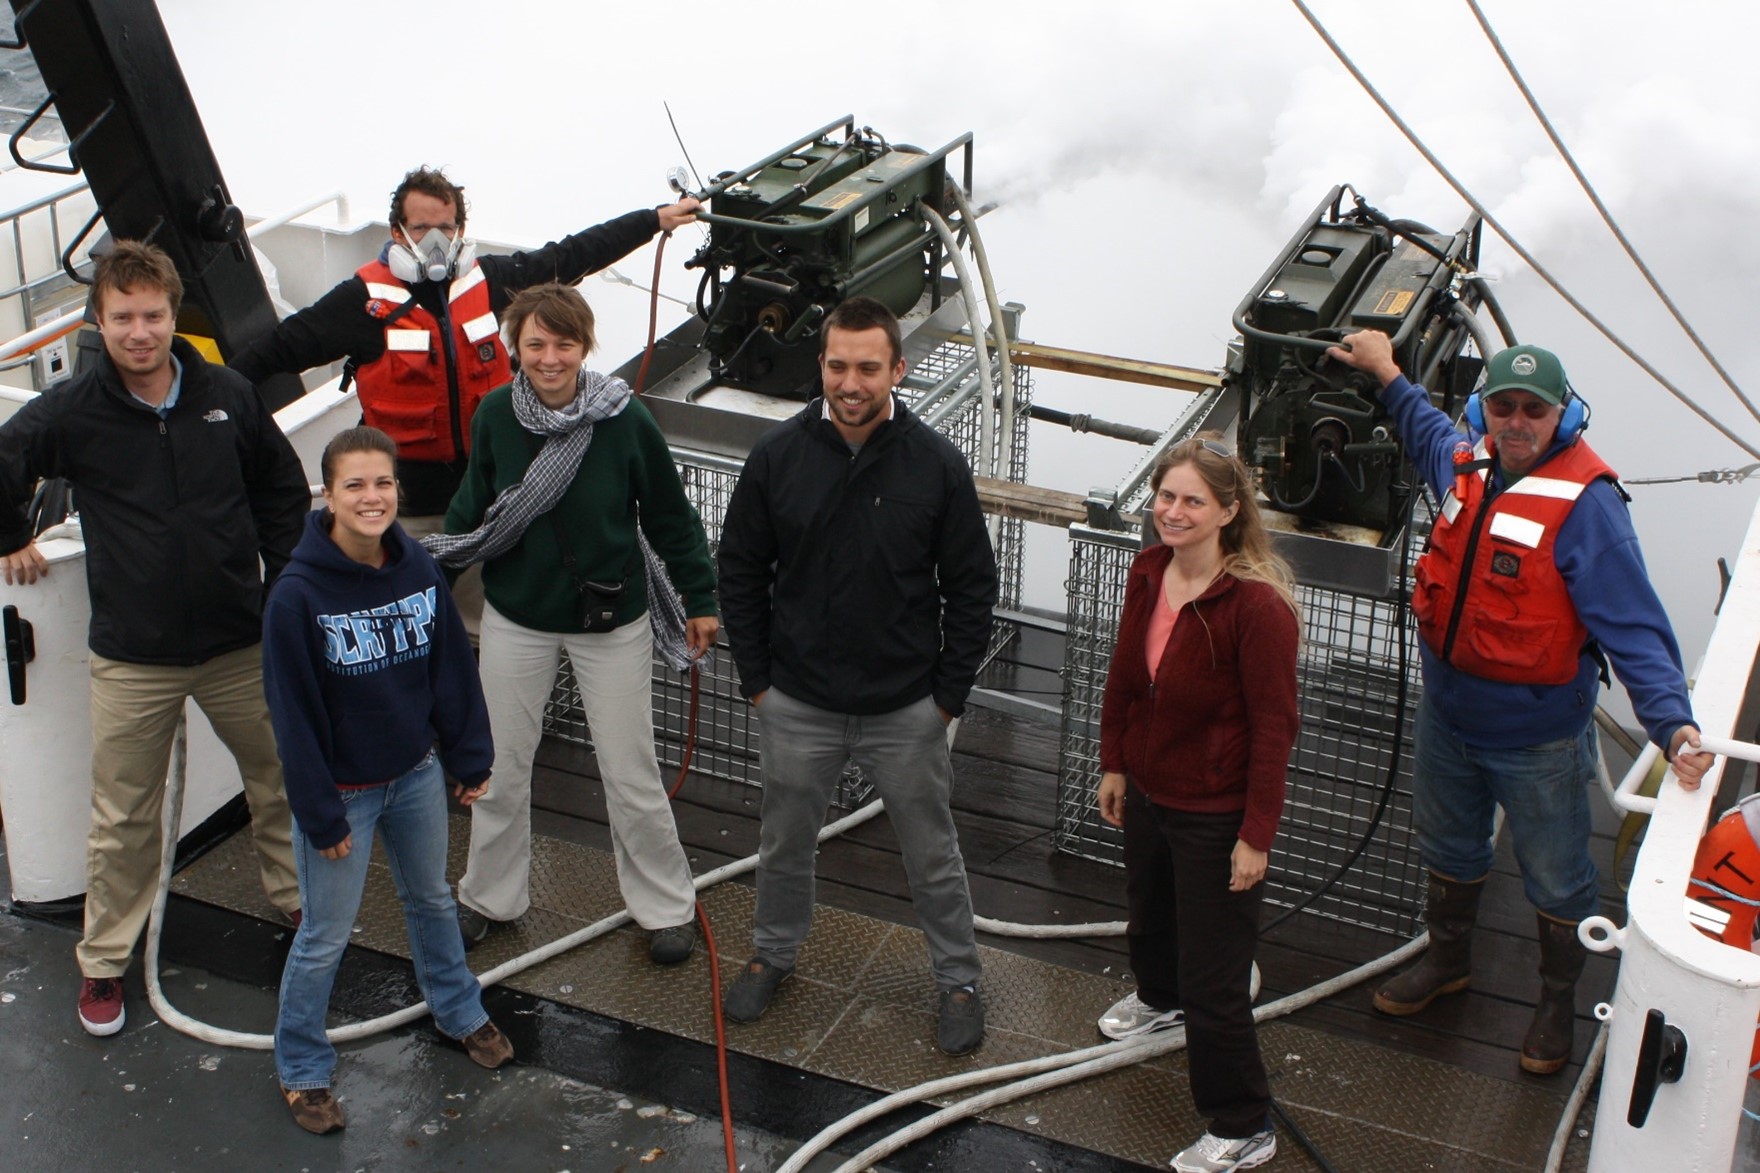 Climate scientist Lynn Russell is second from right in this July 2011 at-sea portrait during the Eastern Pacific Emitted Aerosol Cloud Experiment (E-PEACE) while generating aerosols to track aerosol-cloud interactions. With her aboard the R/V Point Sur, left to right, are Lars Ahlm (a Scripps postdoc, now at Stockholm University), Amanda Frossard (Scripps PhD student, now at University of Georgia), Johannes Muelmenstaedt (a Scripps postdoc, now at PNNL), Anna Wonaschutz (University of Arizona graduate student, now at the University of Vienna), Rob Modini (a Scripps postdoc, now at the Paul Scherrer Institut in Switzerland), and Tom Maggard (a Scripps engineer). 